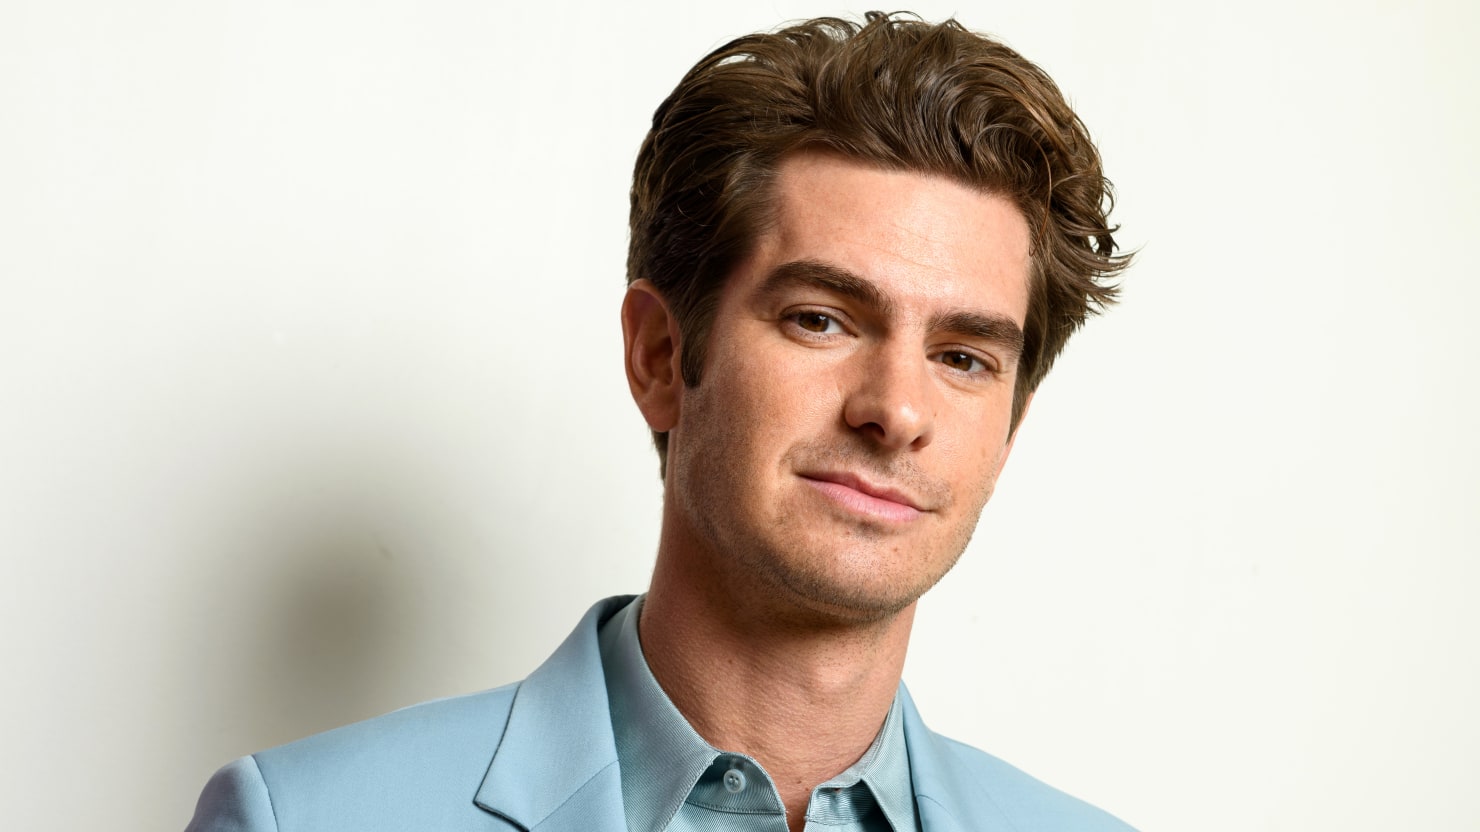 Andrew Garfield Is Having a Crisis of Faith